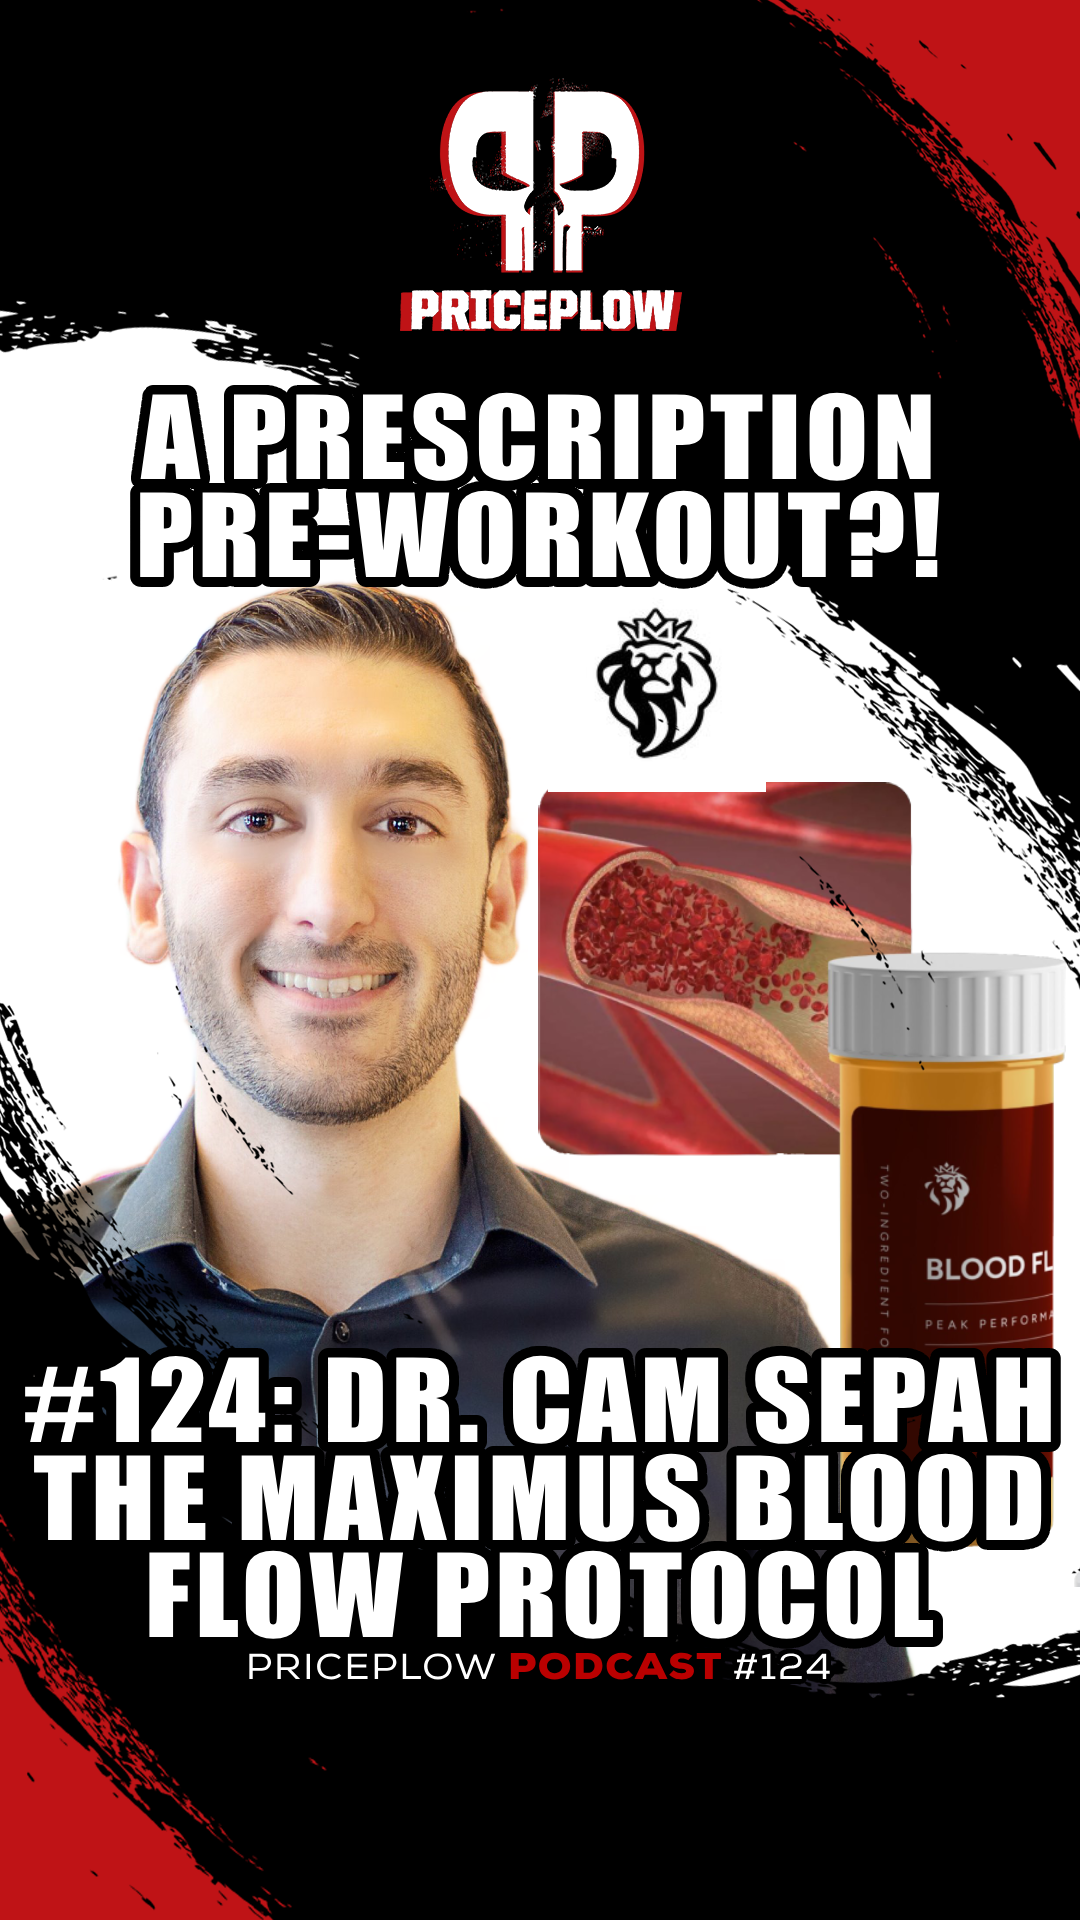 Dr. Cameron Sepah: The Maximus Blood Flow Protocol on PricePlow Podcast Episode #124